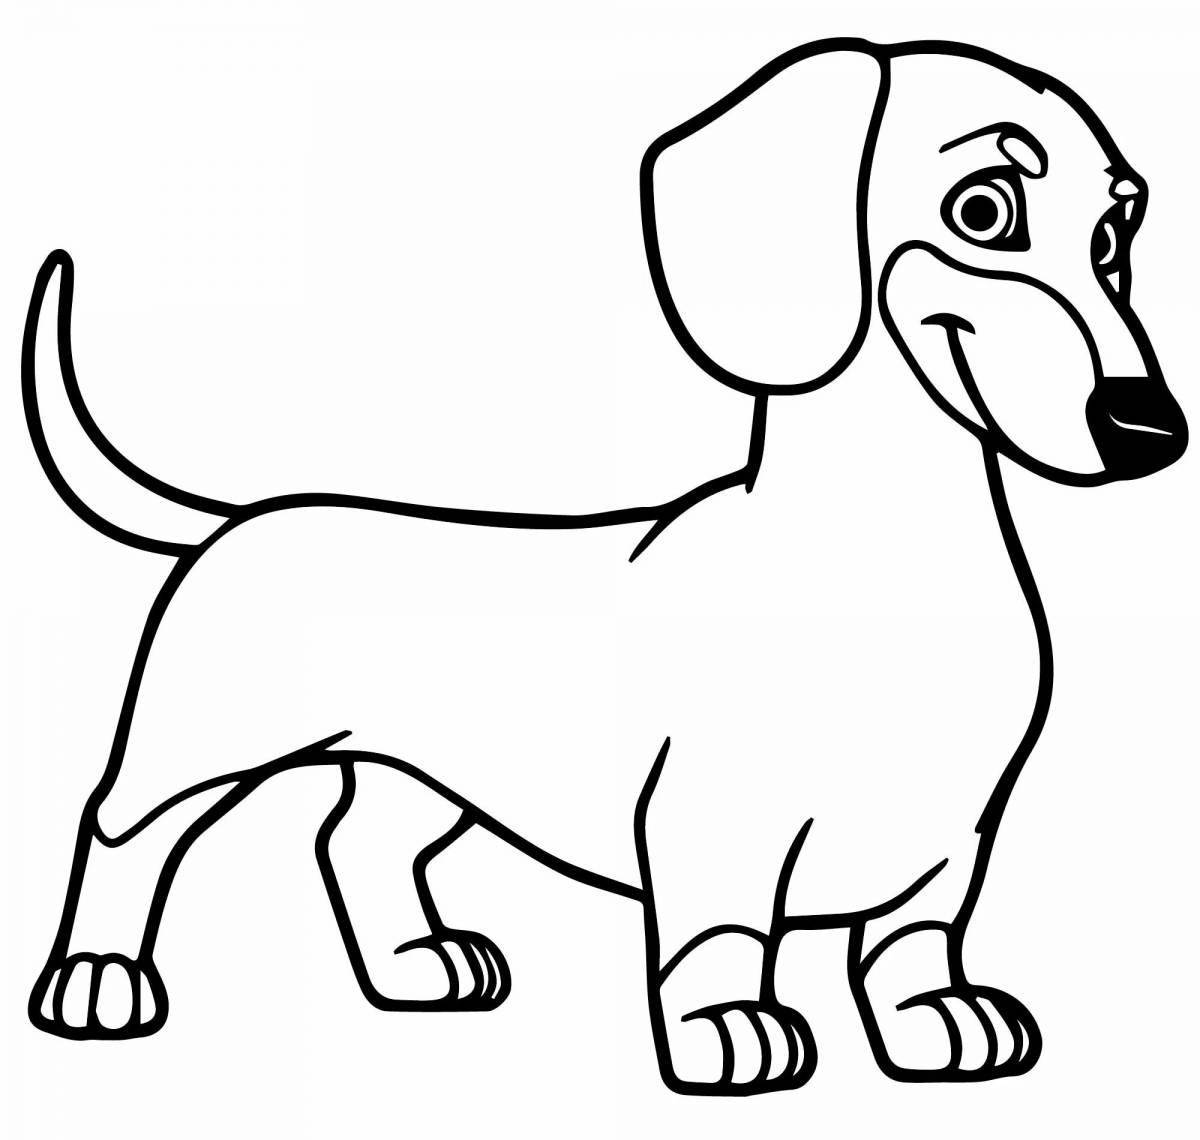 Dachshund funny coloring book